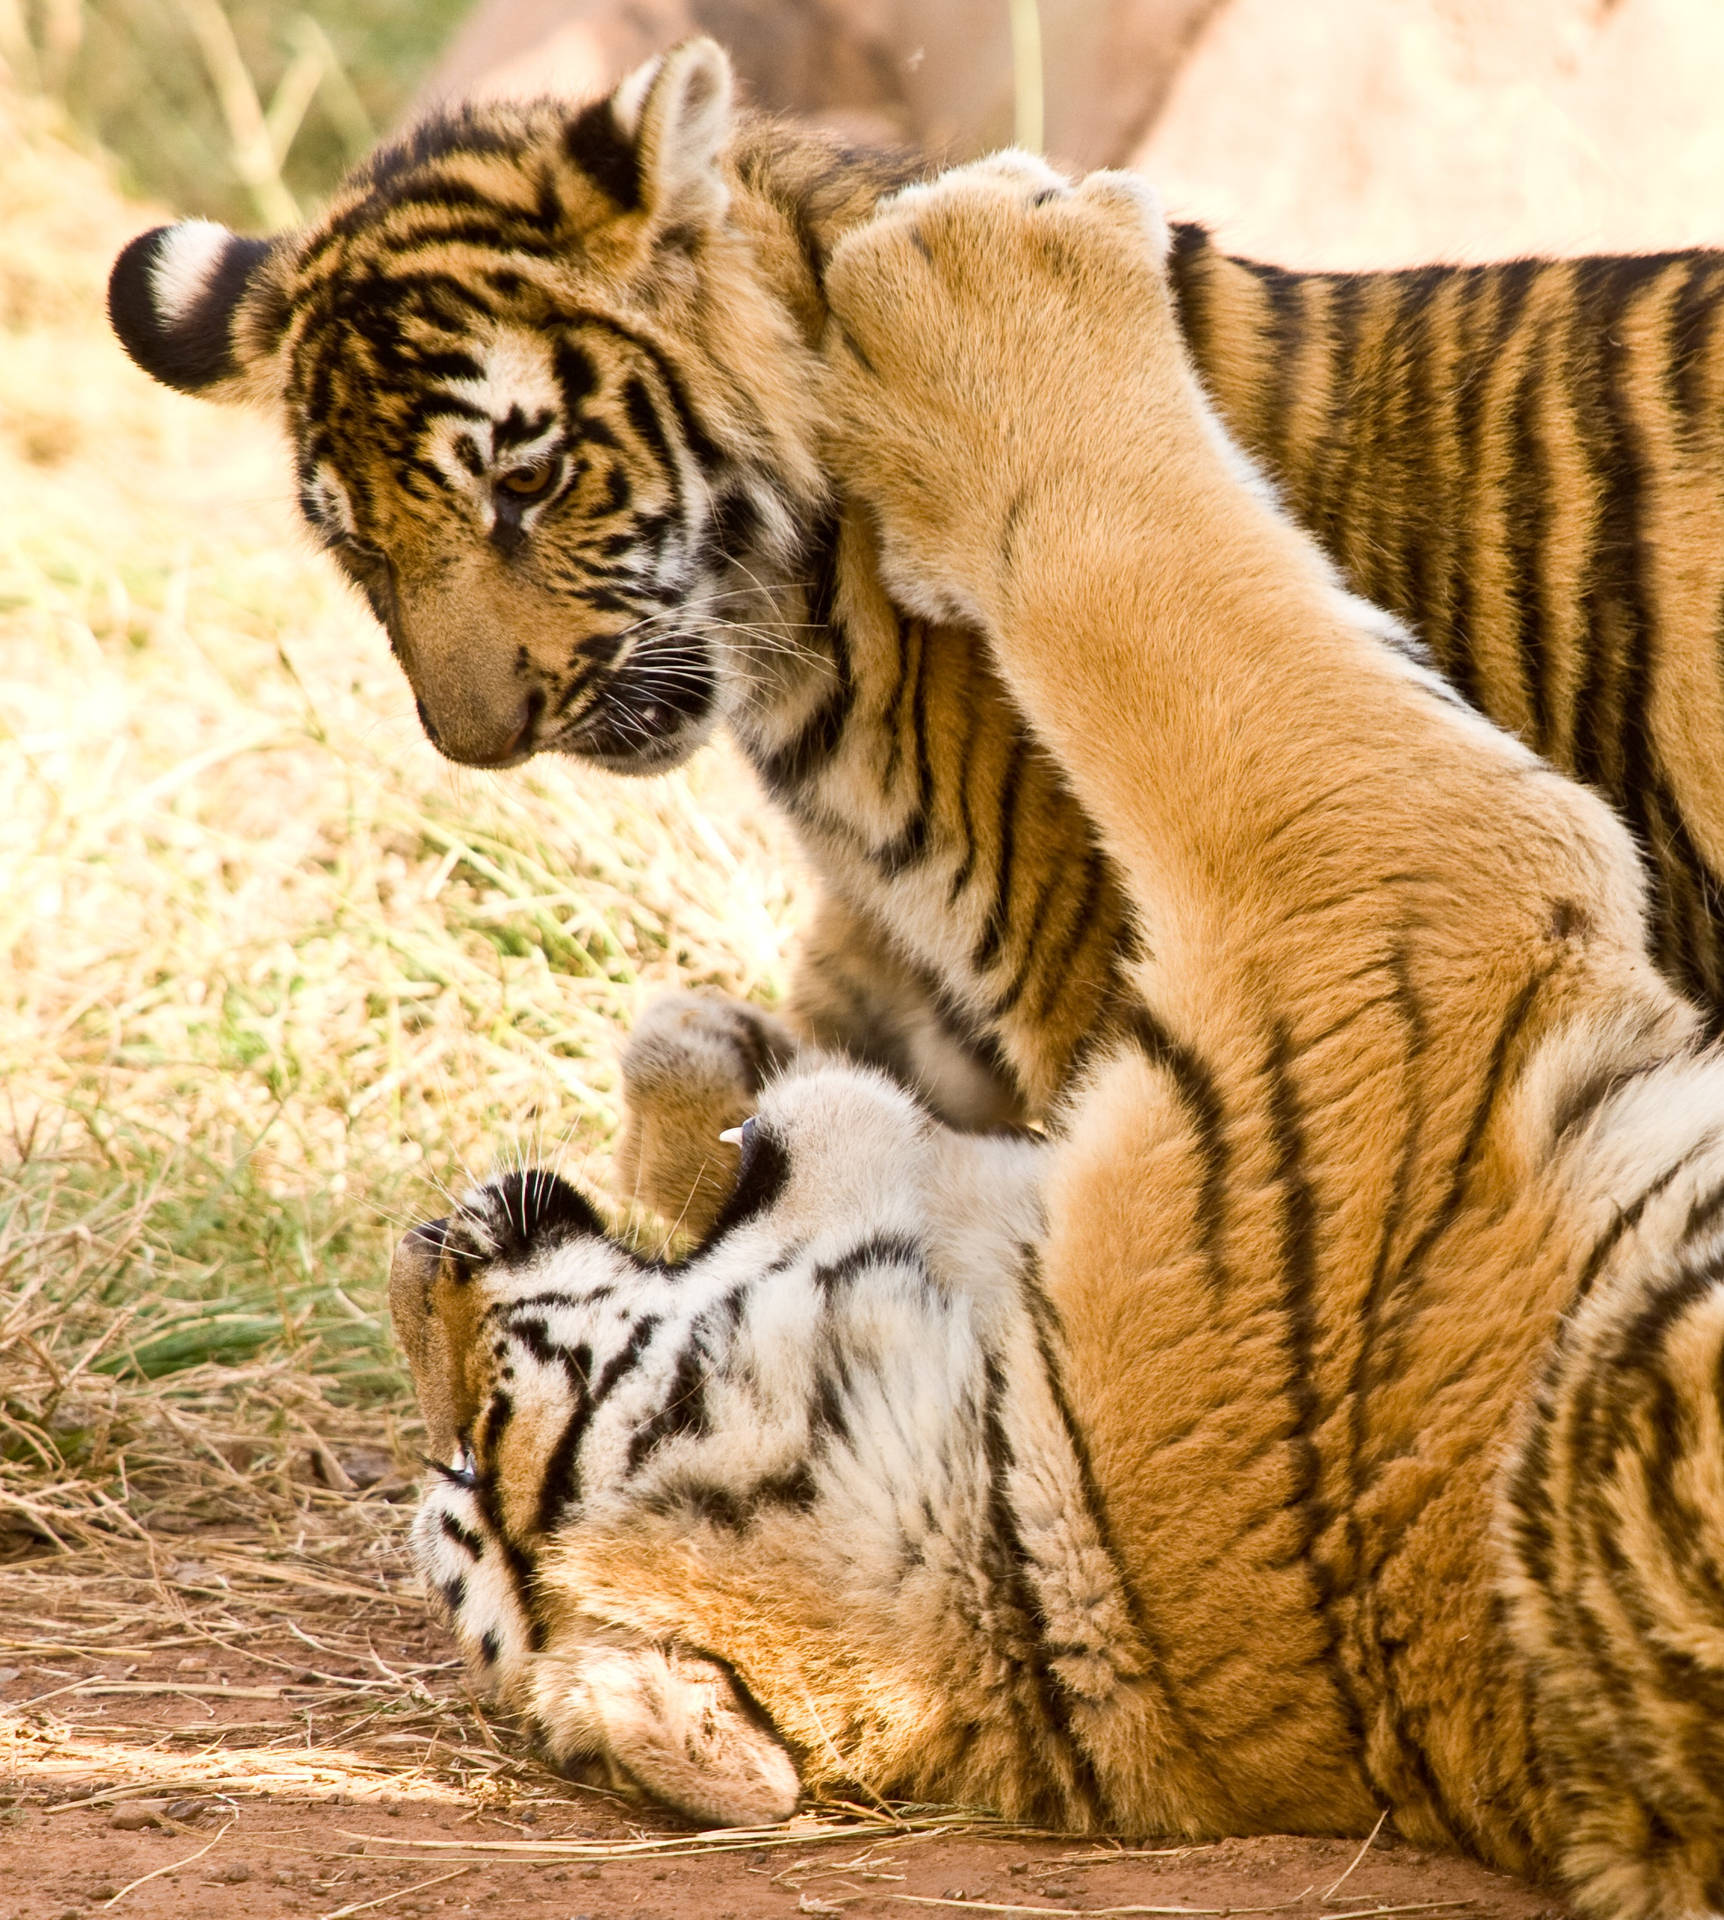 Play Fighting Tiger Iphone Wallpaper